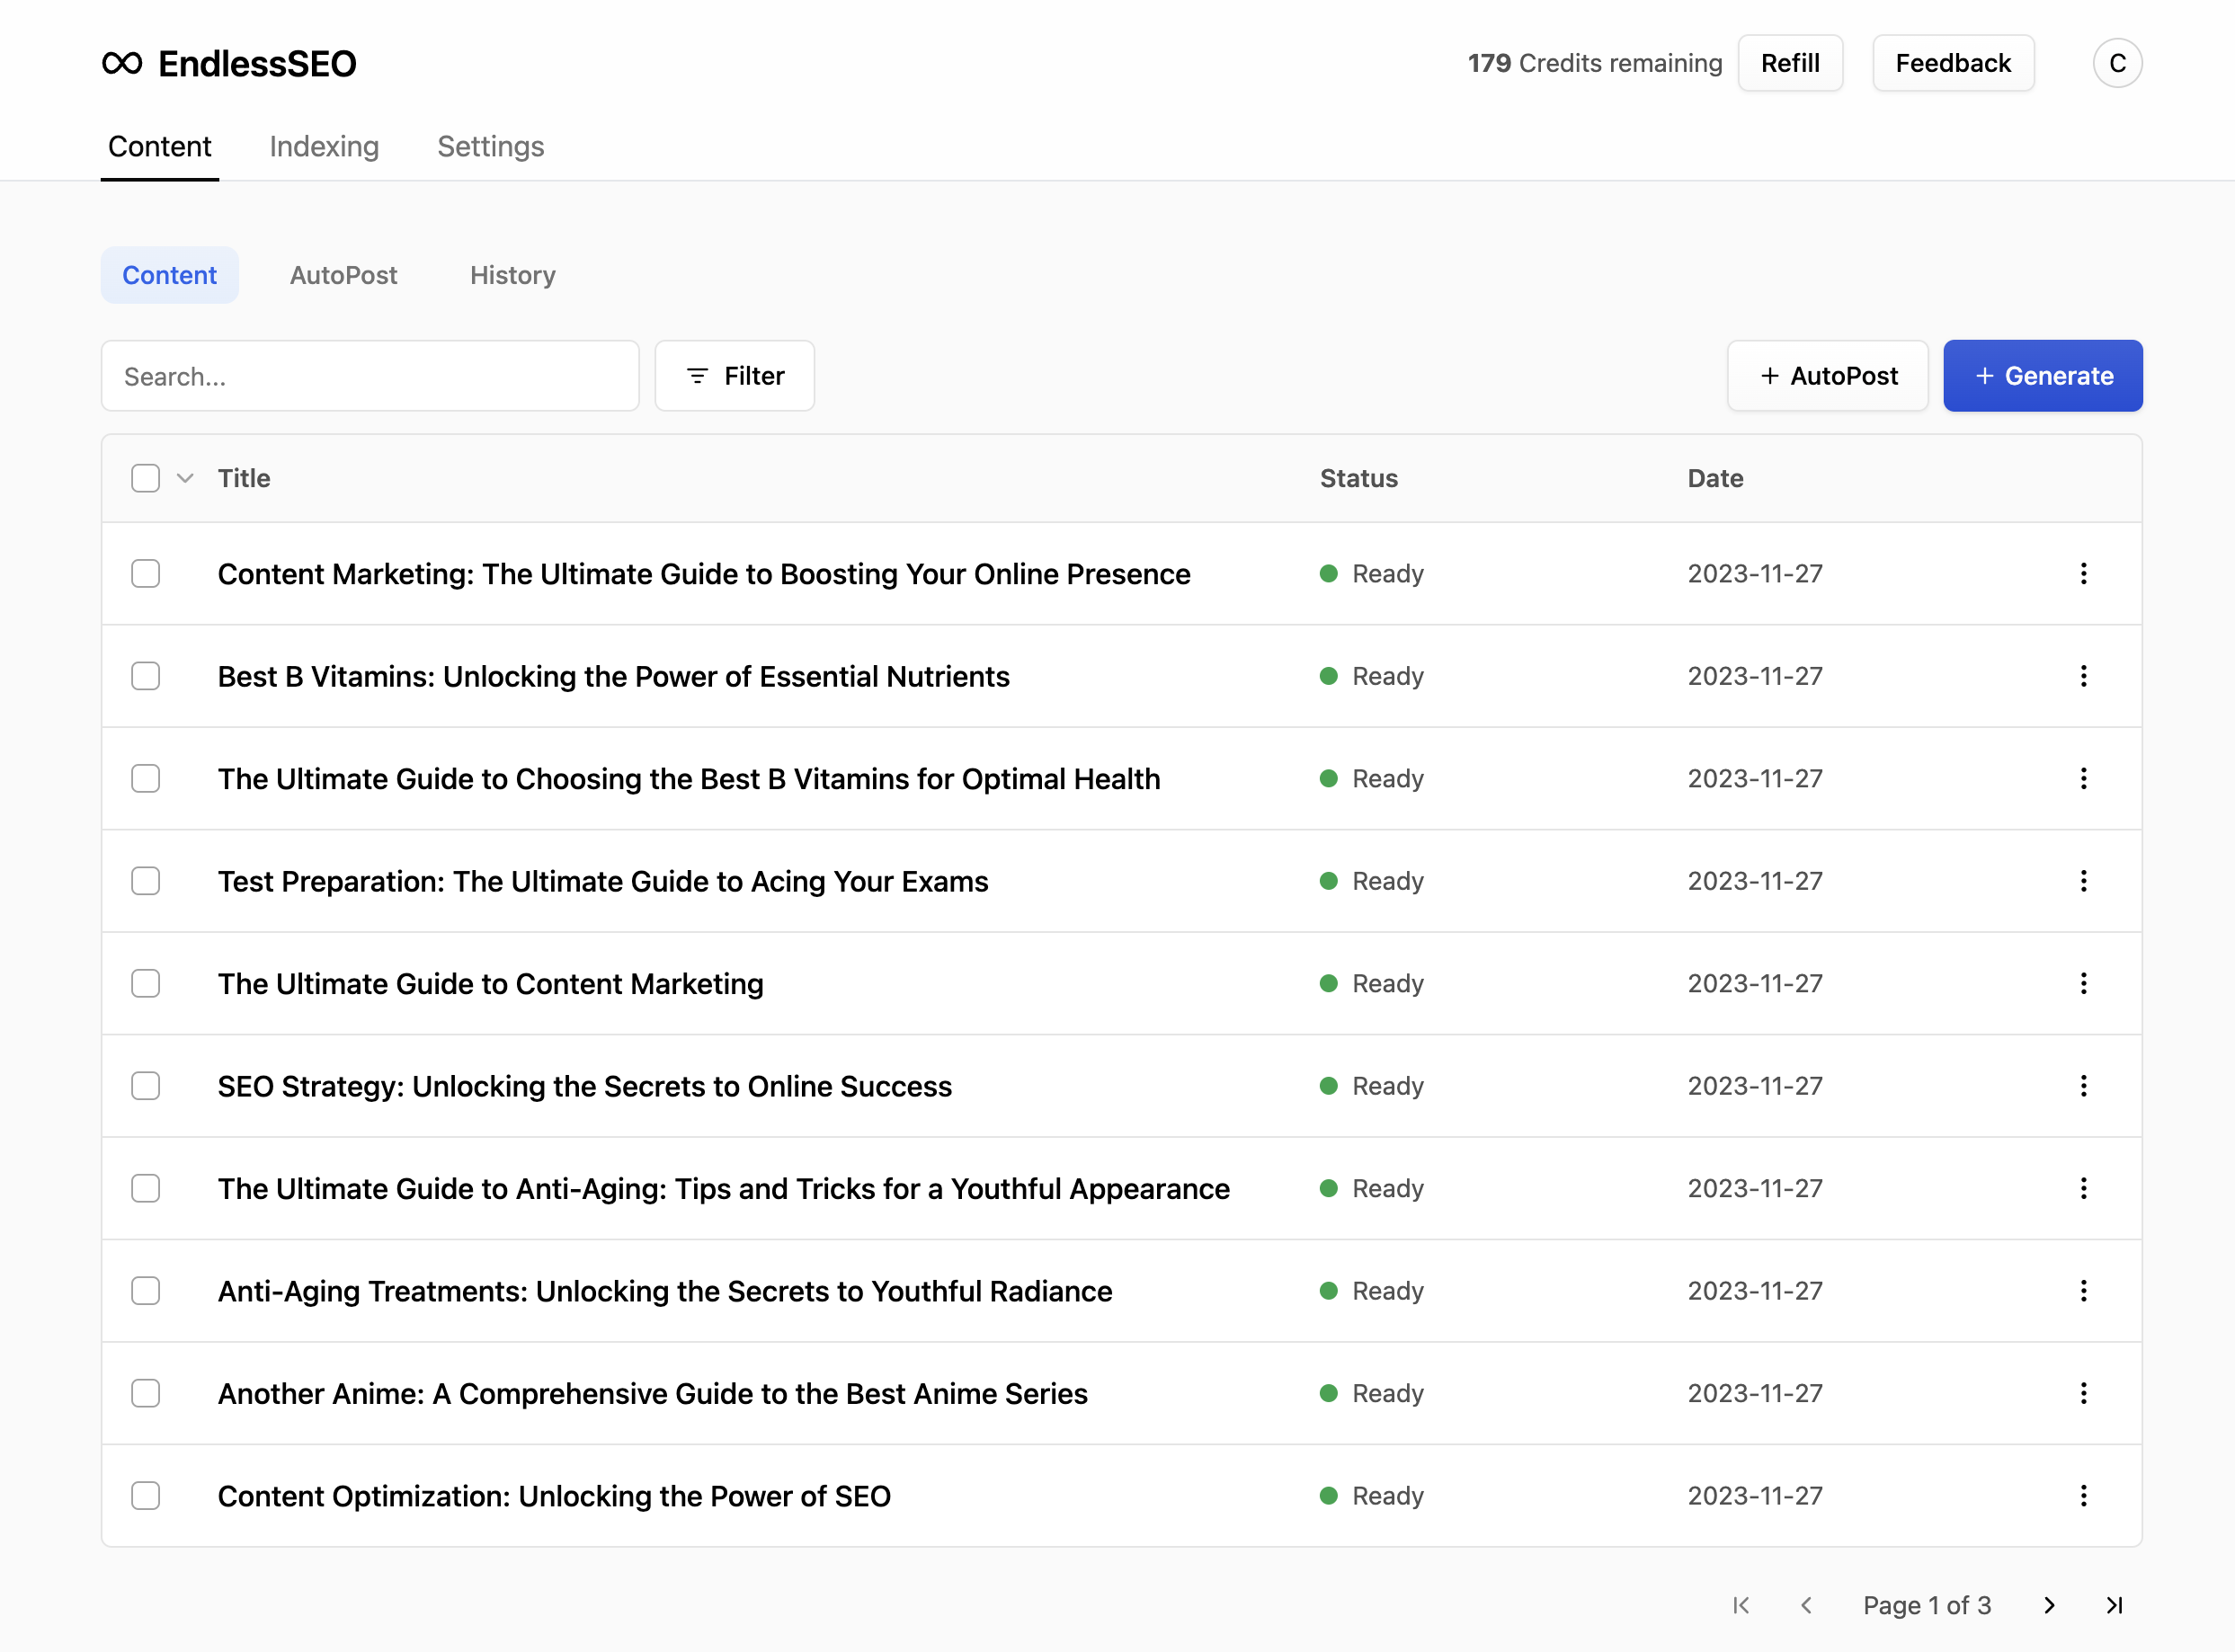 The dashboard of EndlessSEO showing a list of generated content